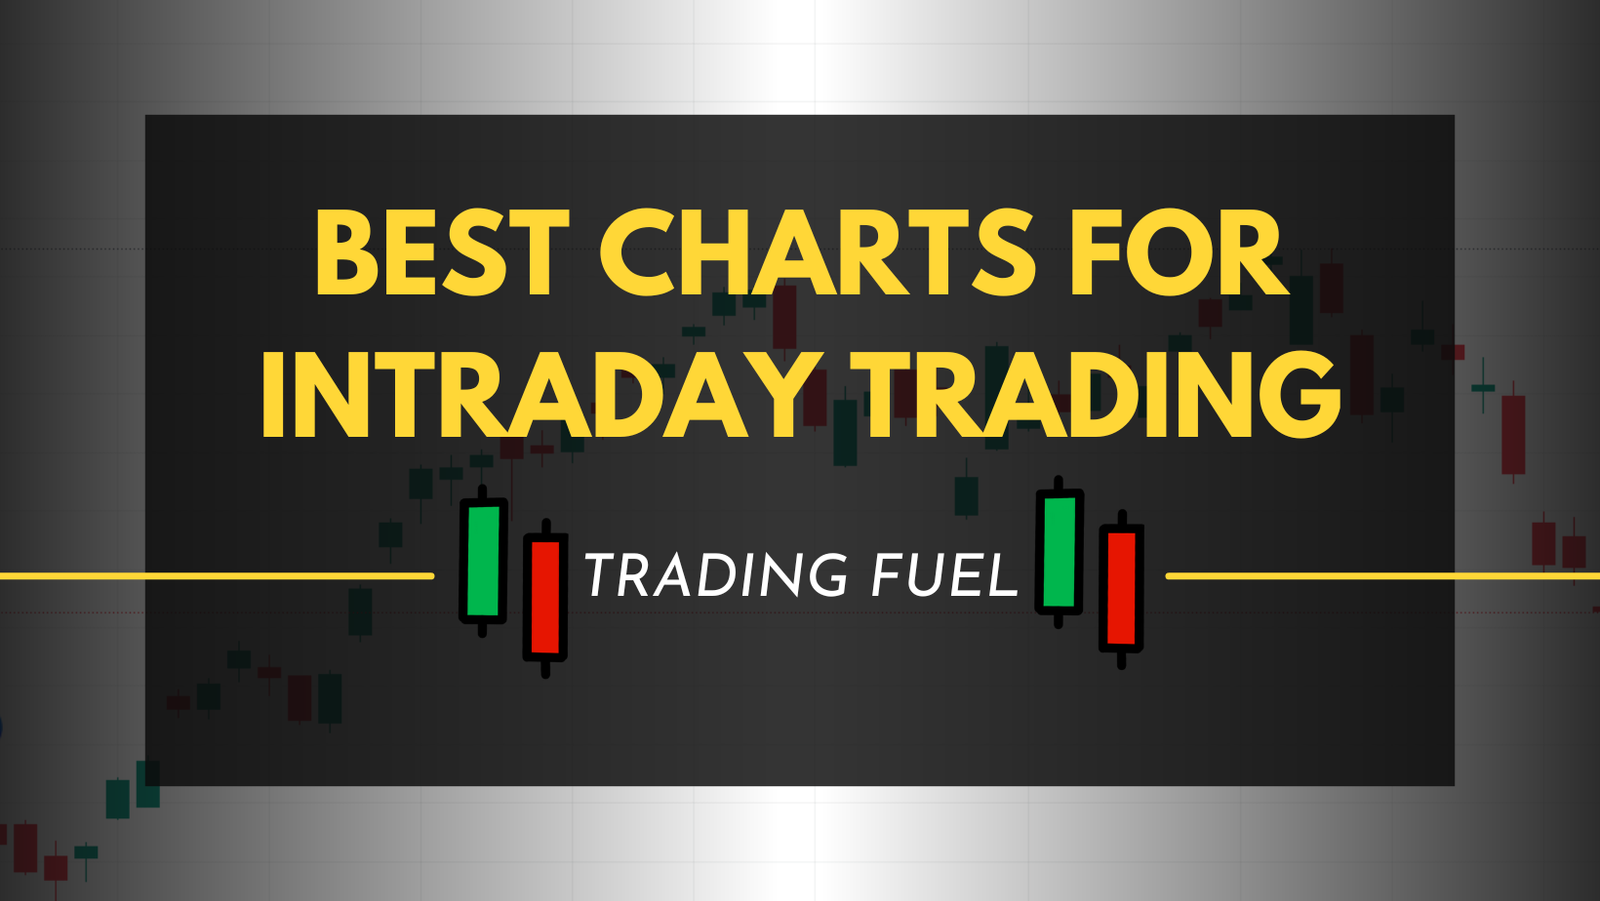 Best Charts for Intraday Trading